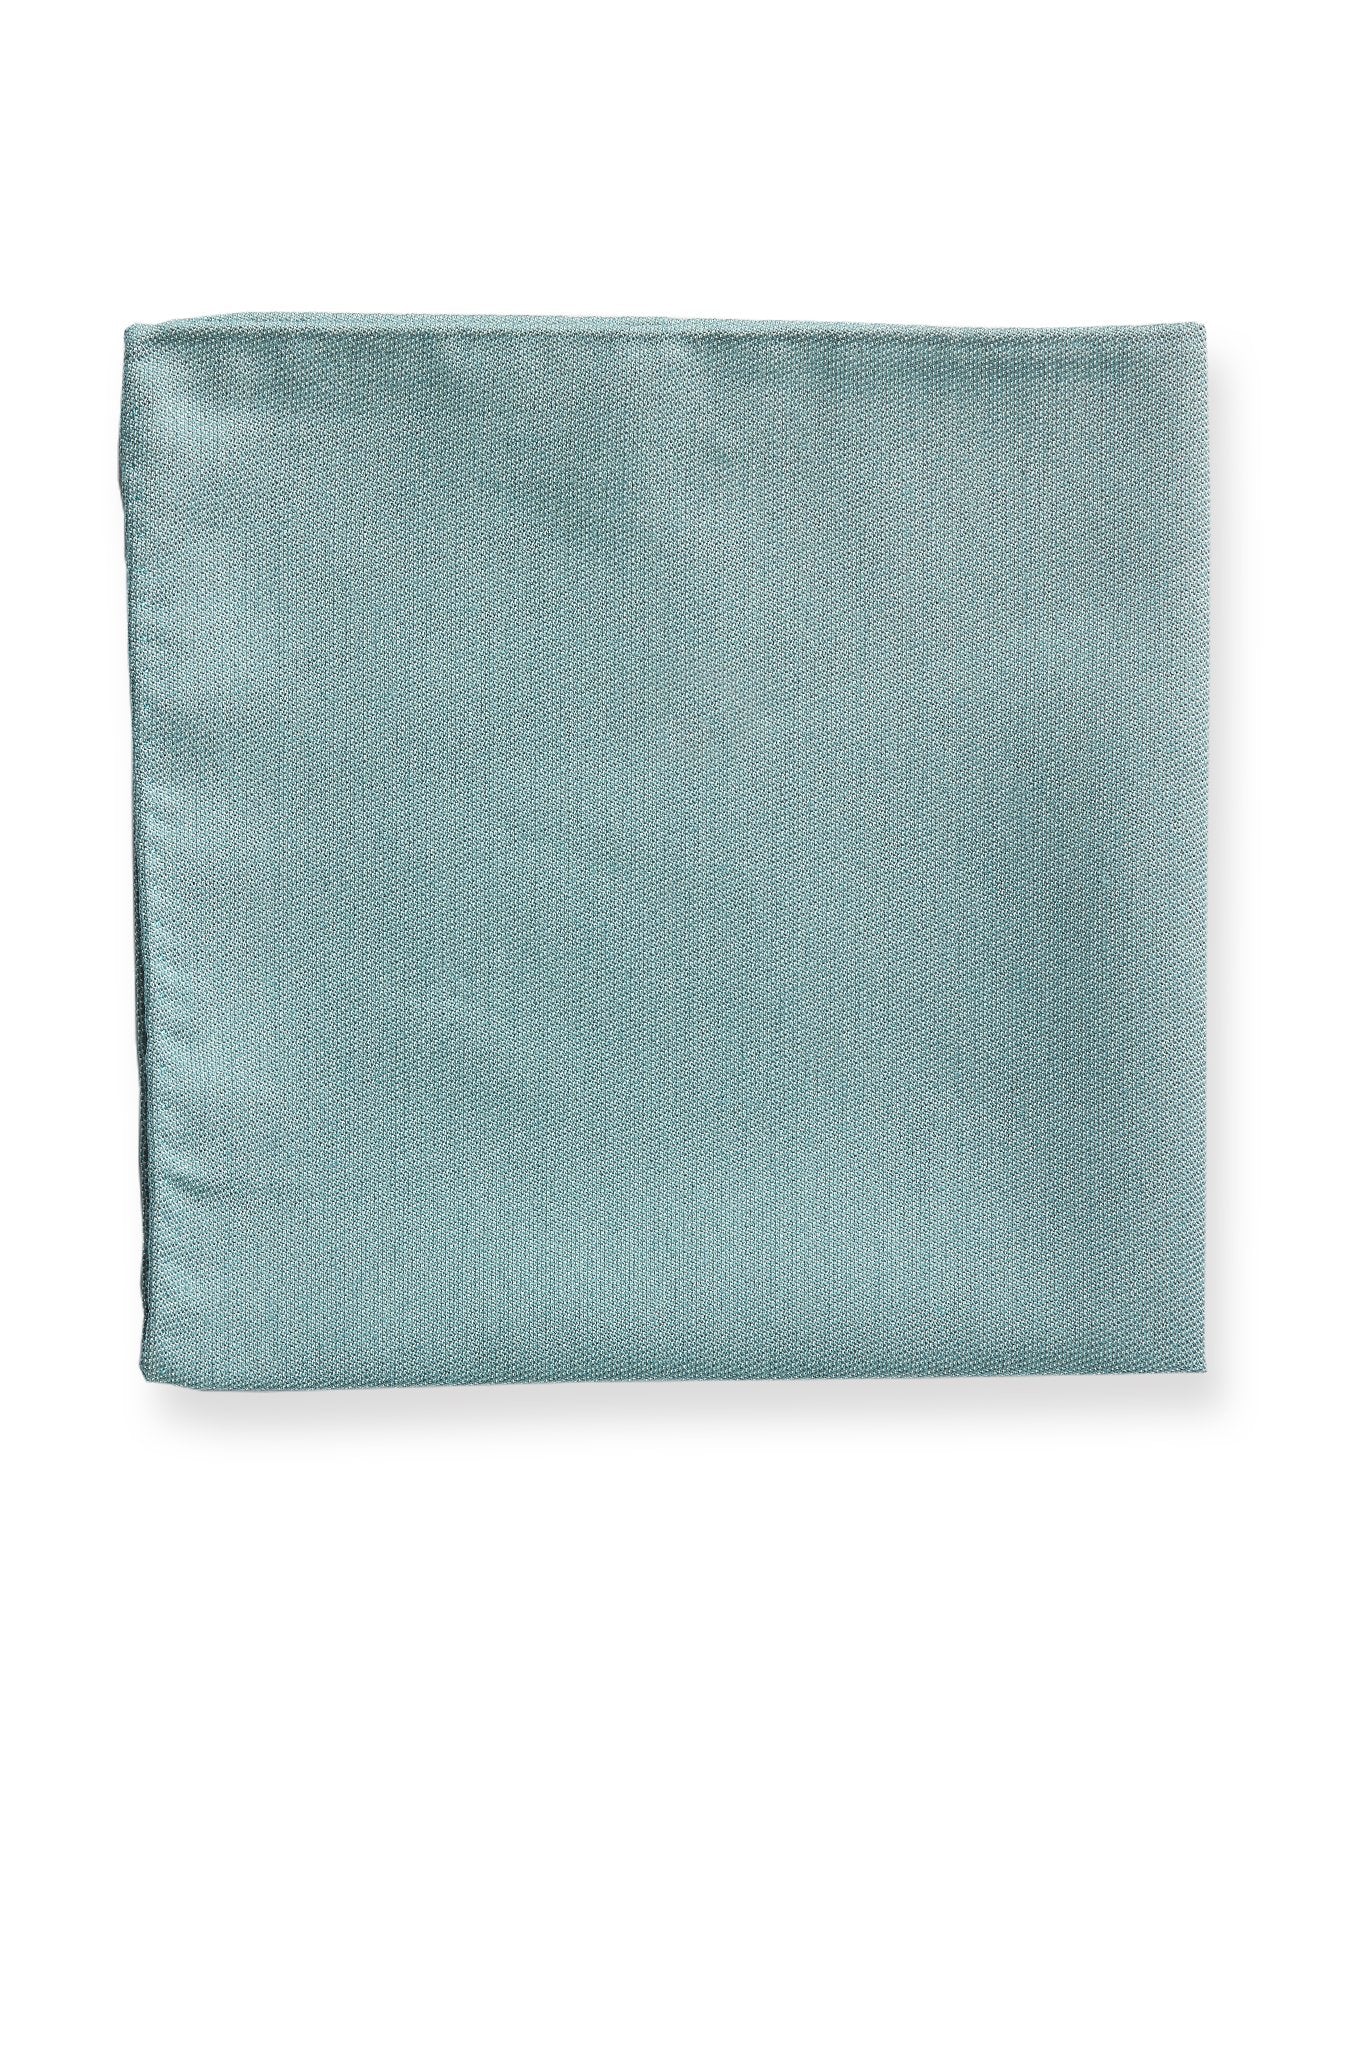 Front view of the Didi Pocket Square by Birdy Grey in sea glass with a matte finish folded in quarters.